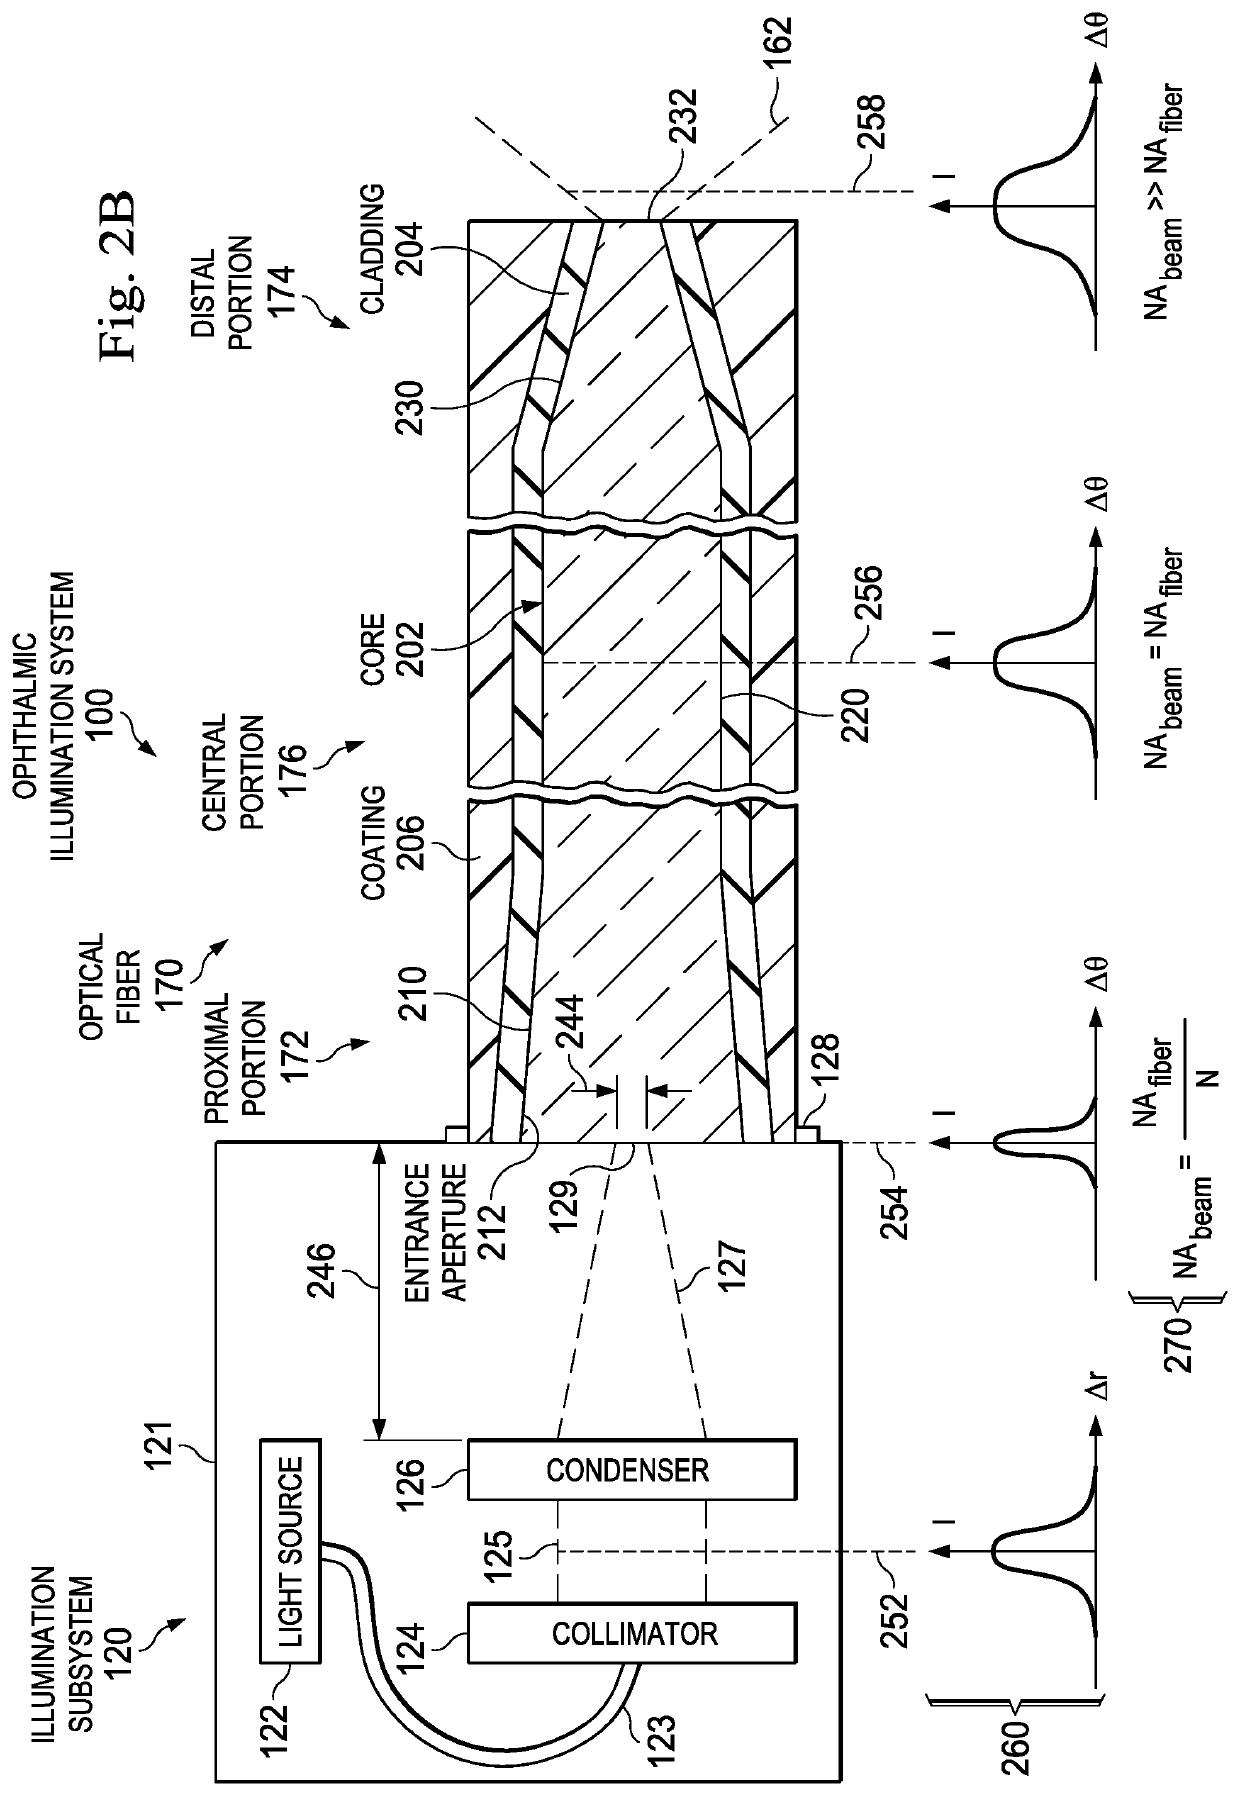 Optical fiber having proximal taper for ophthalmic surgical illumination